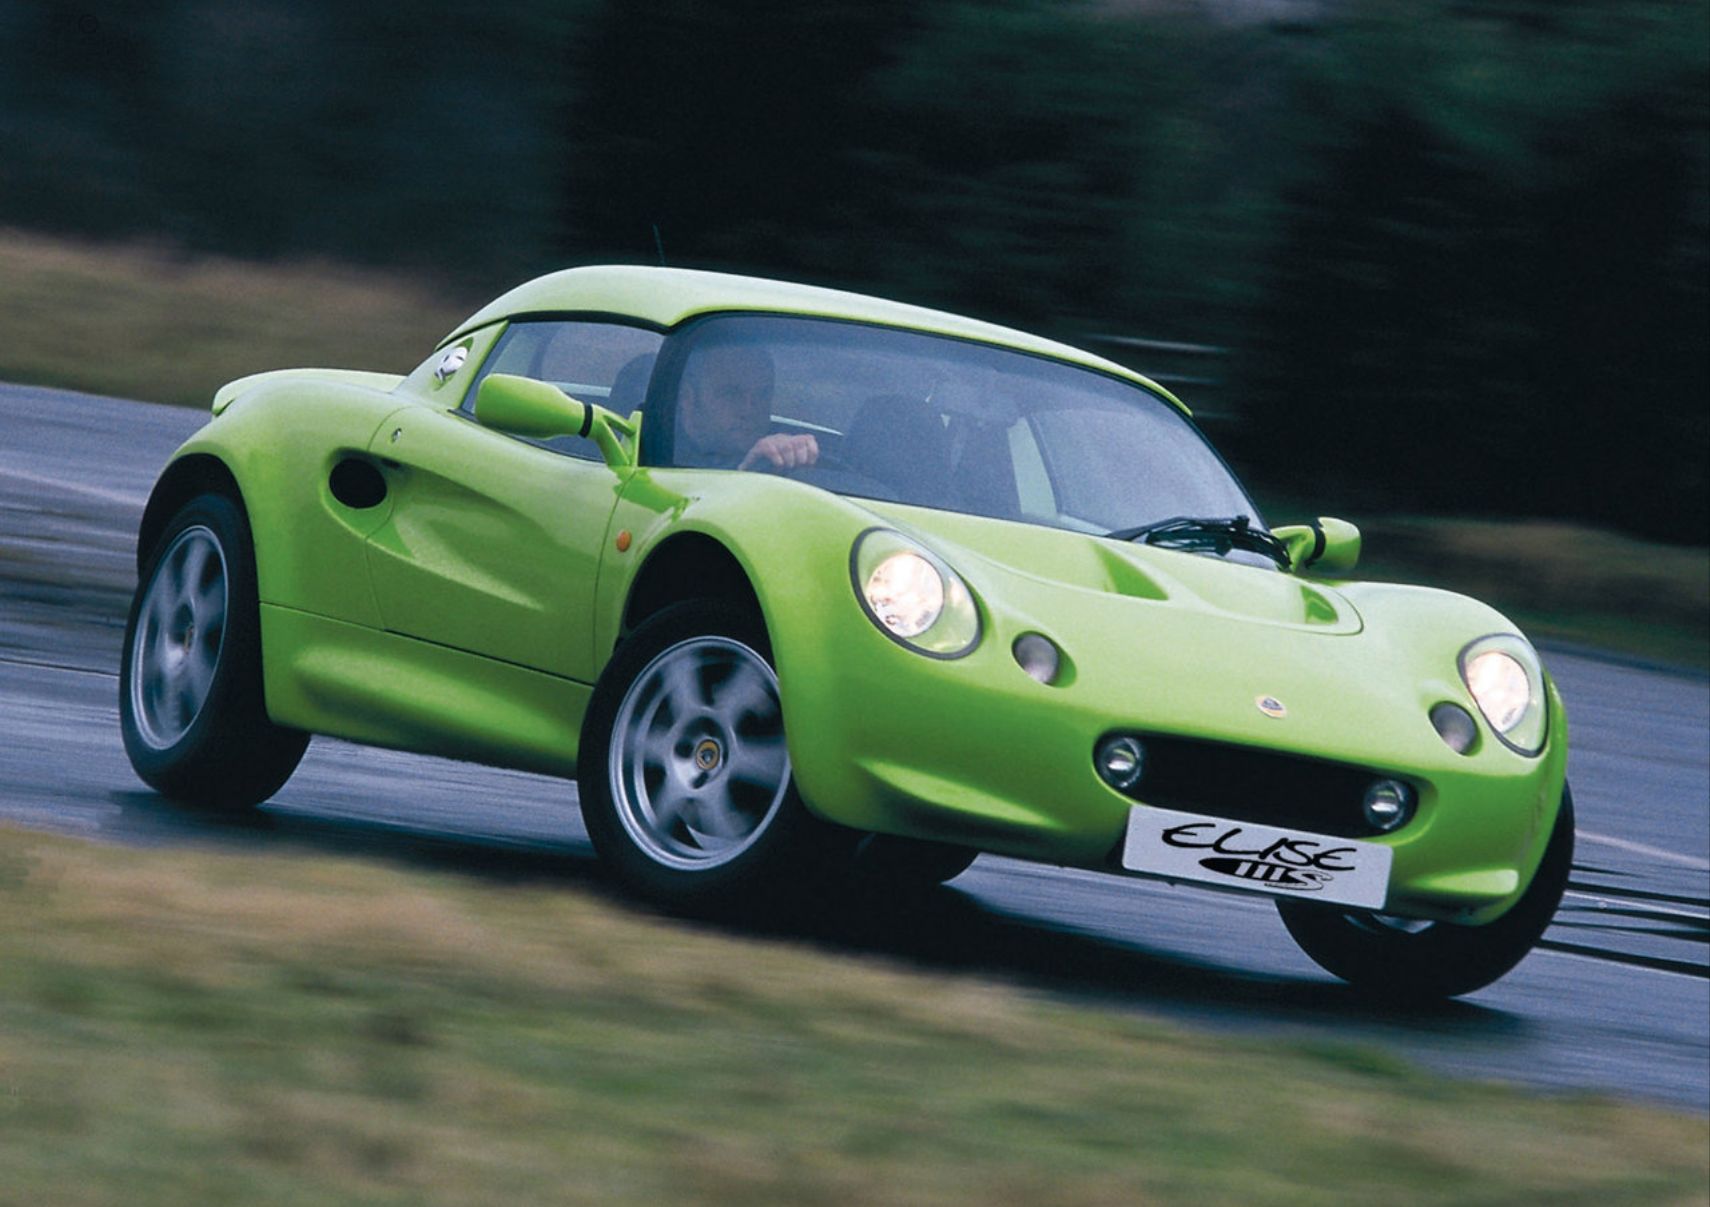 1999 Lotus Elise Series 1 Front Quarter View Green On A Racetrack